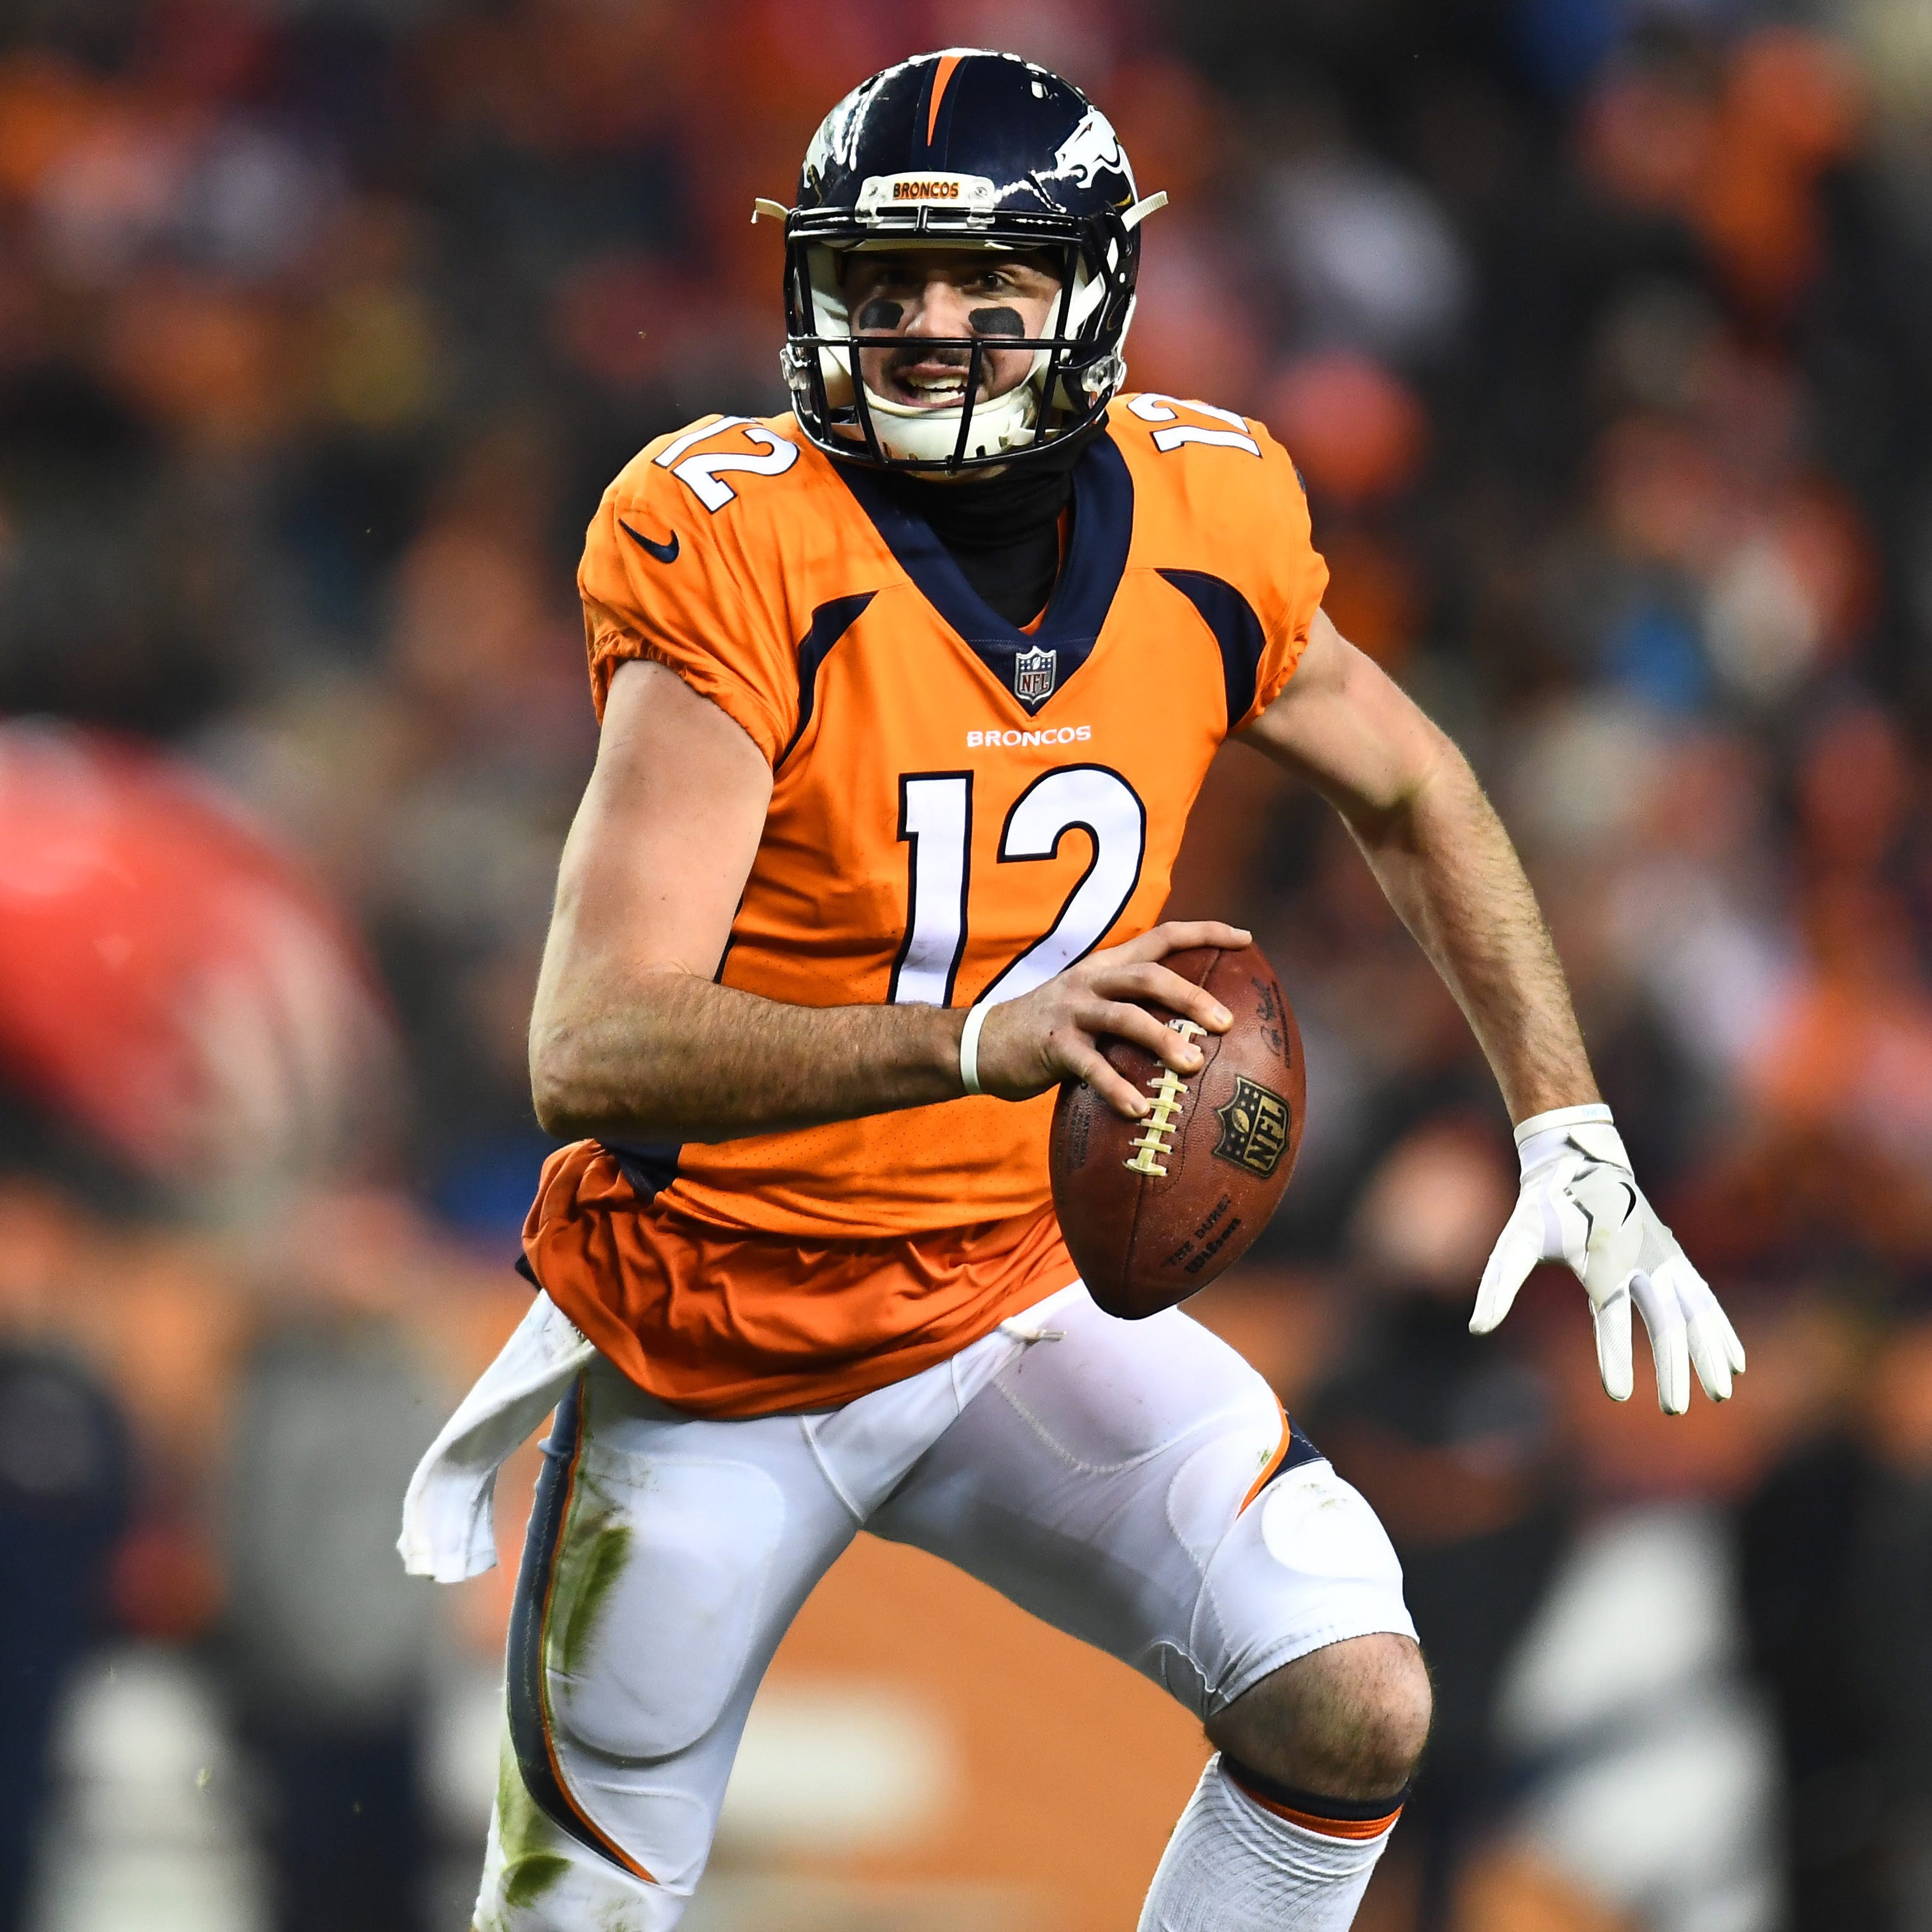 Denver Broncos quarterback Paxton Lynch (12) scrambles in the fourth quarter against the Kansas City Chiefs at Sports Authority Field at Mile High.